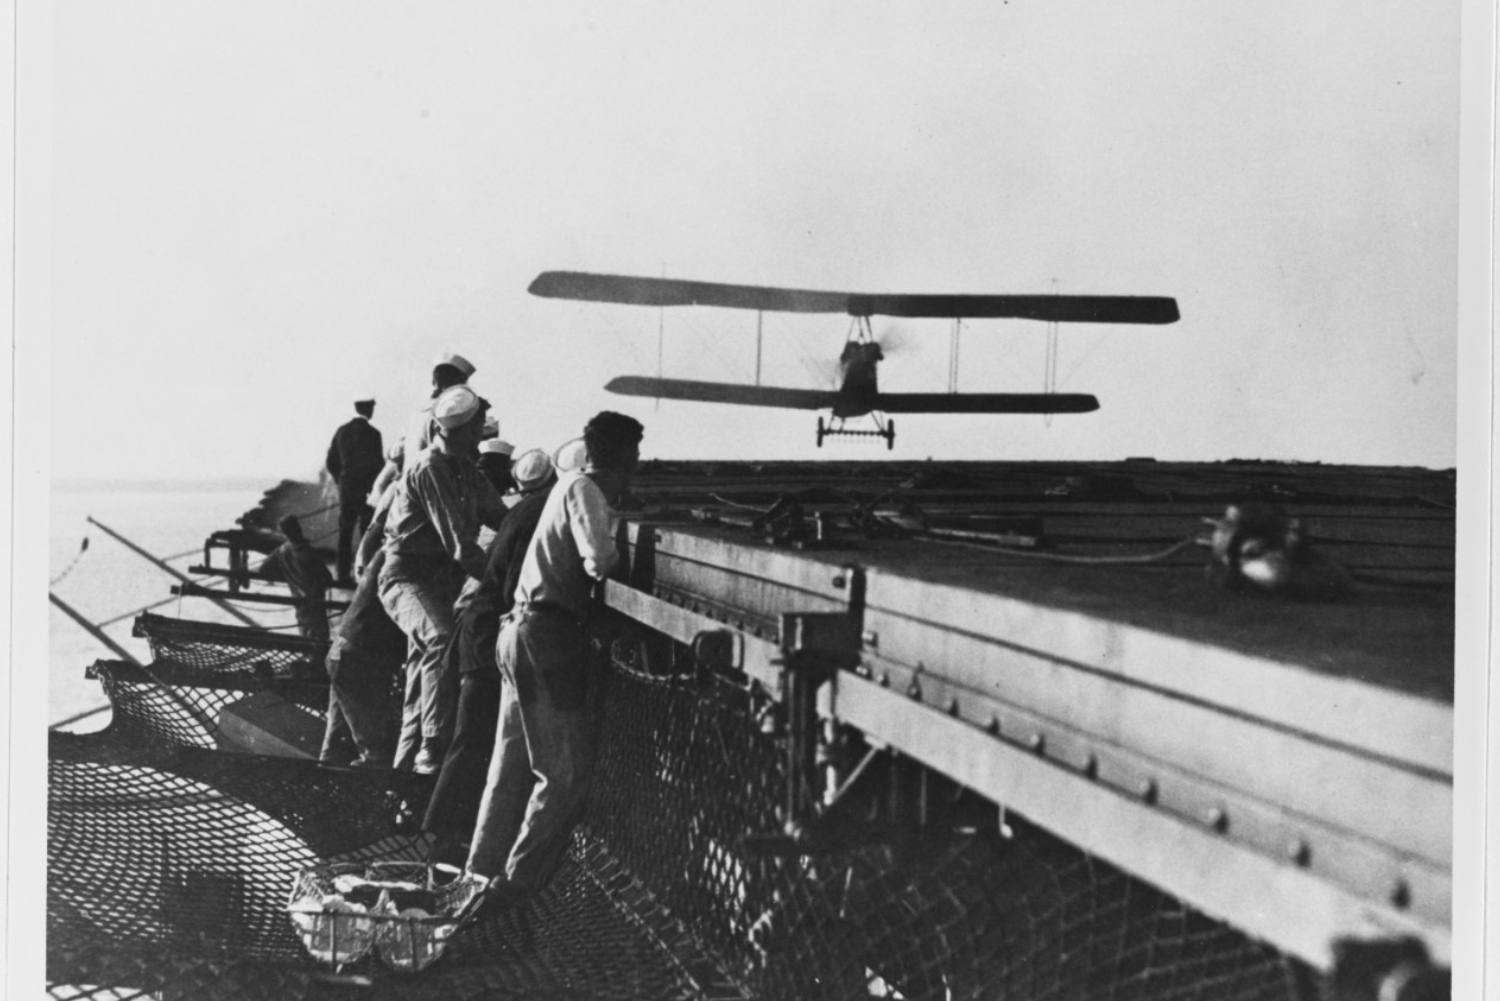 Men on USS Langley aircraft carrier watching plane takeoff